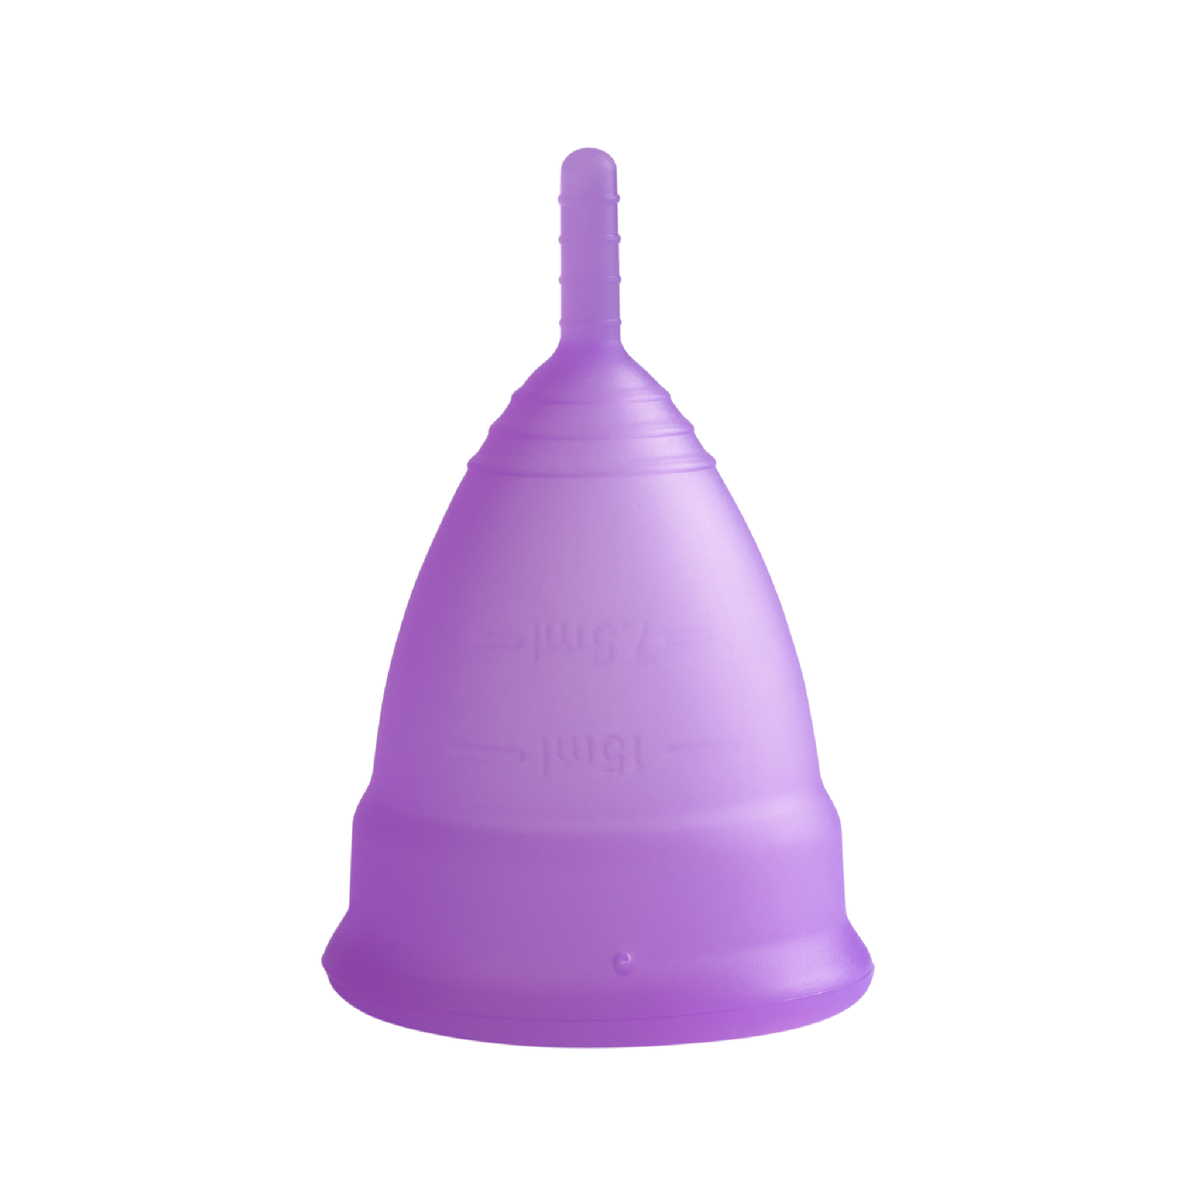 Sirona Reusable Menstrual Cup With Pouch Size Large, 1 pc